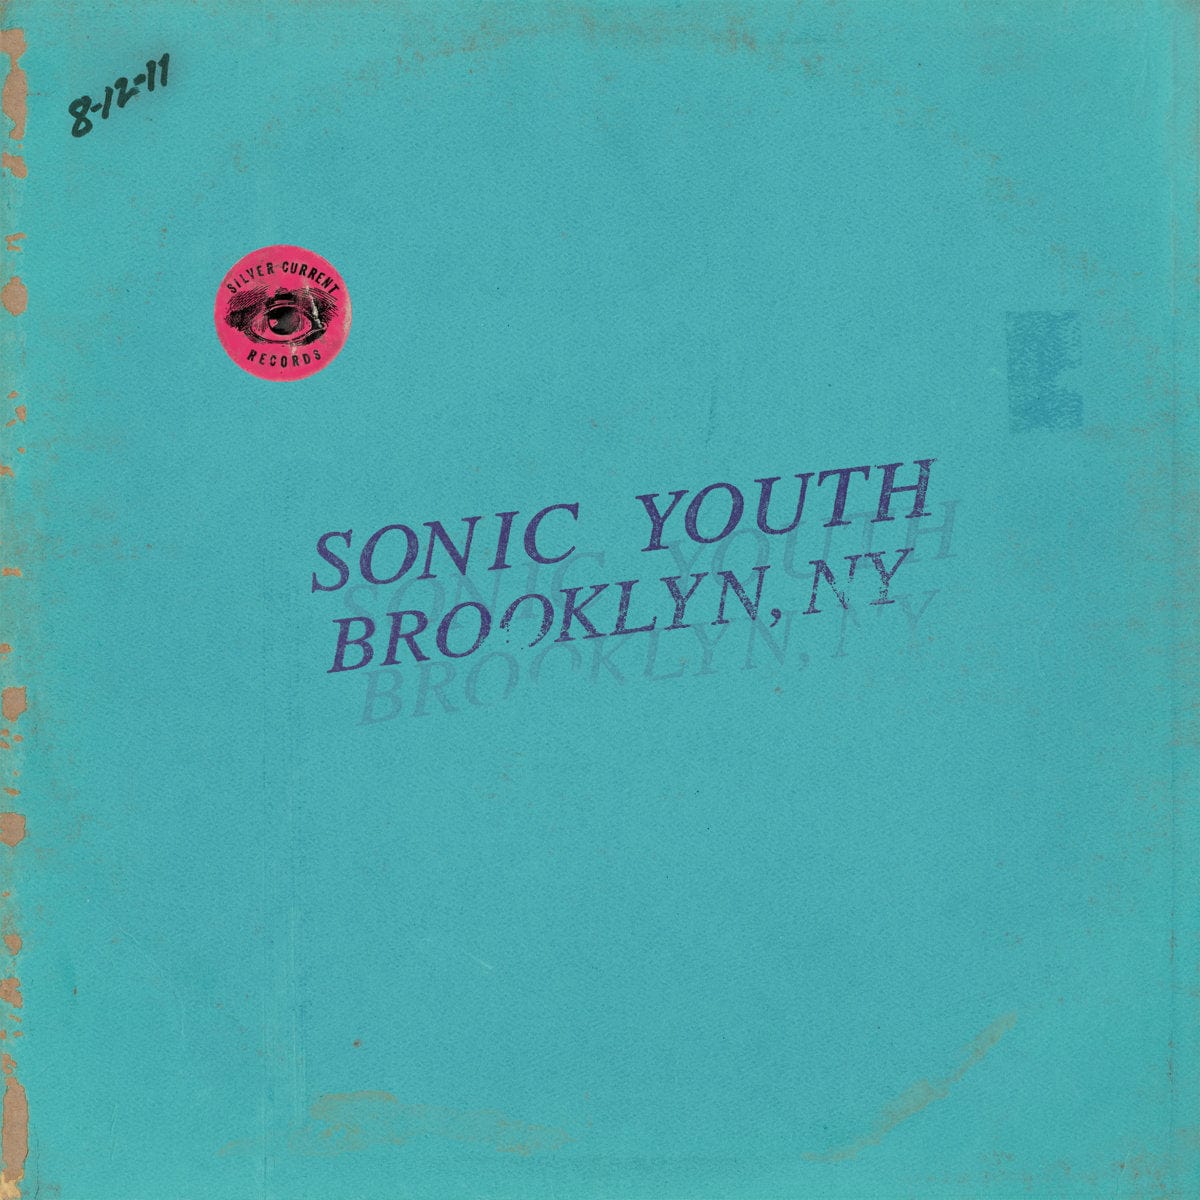 Silver Current CD Sonic Youth "Live in Brooklyn 2011" 2CD